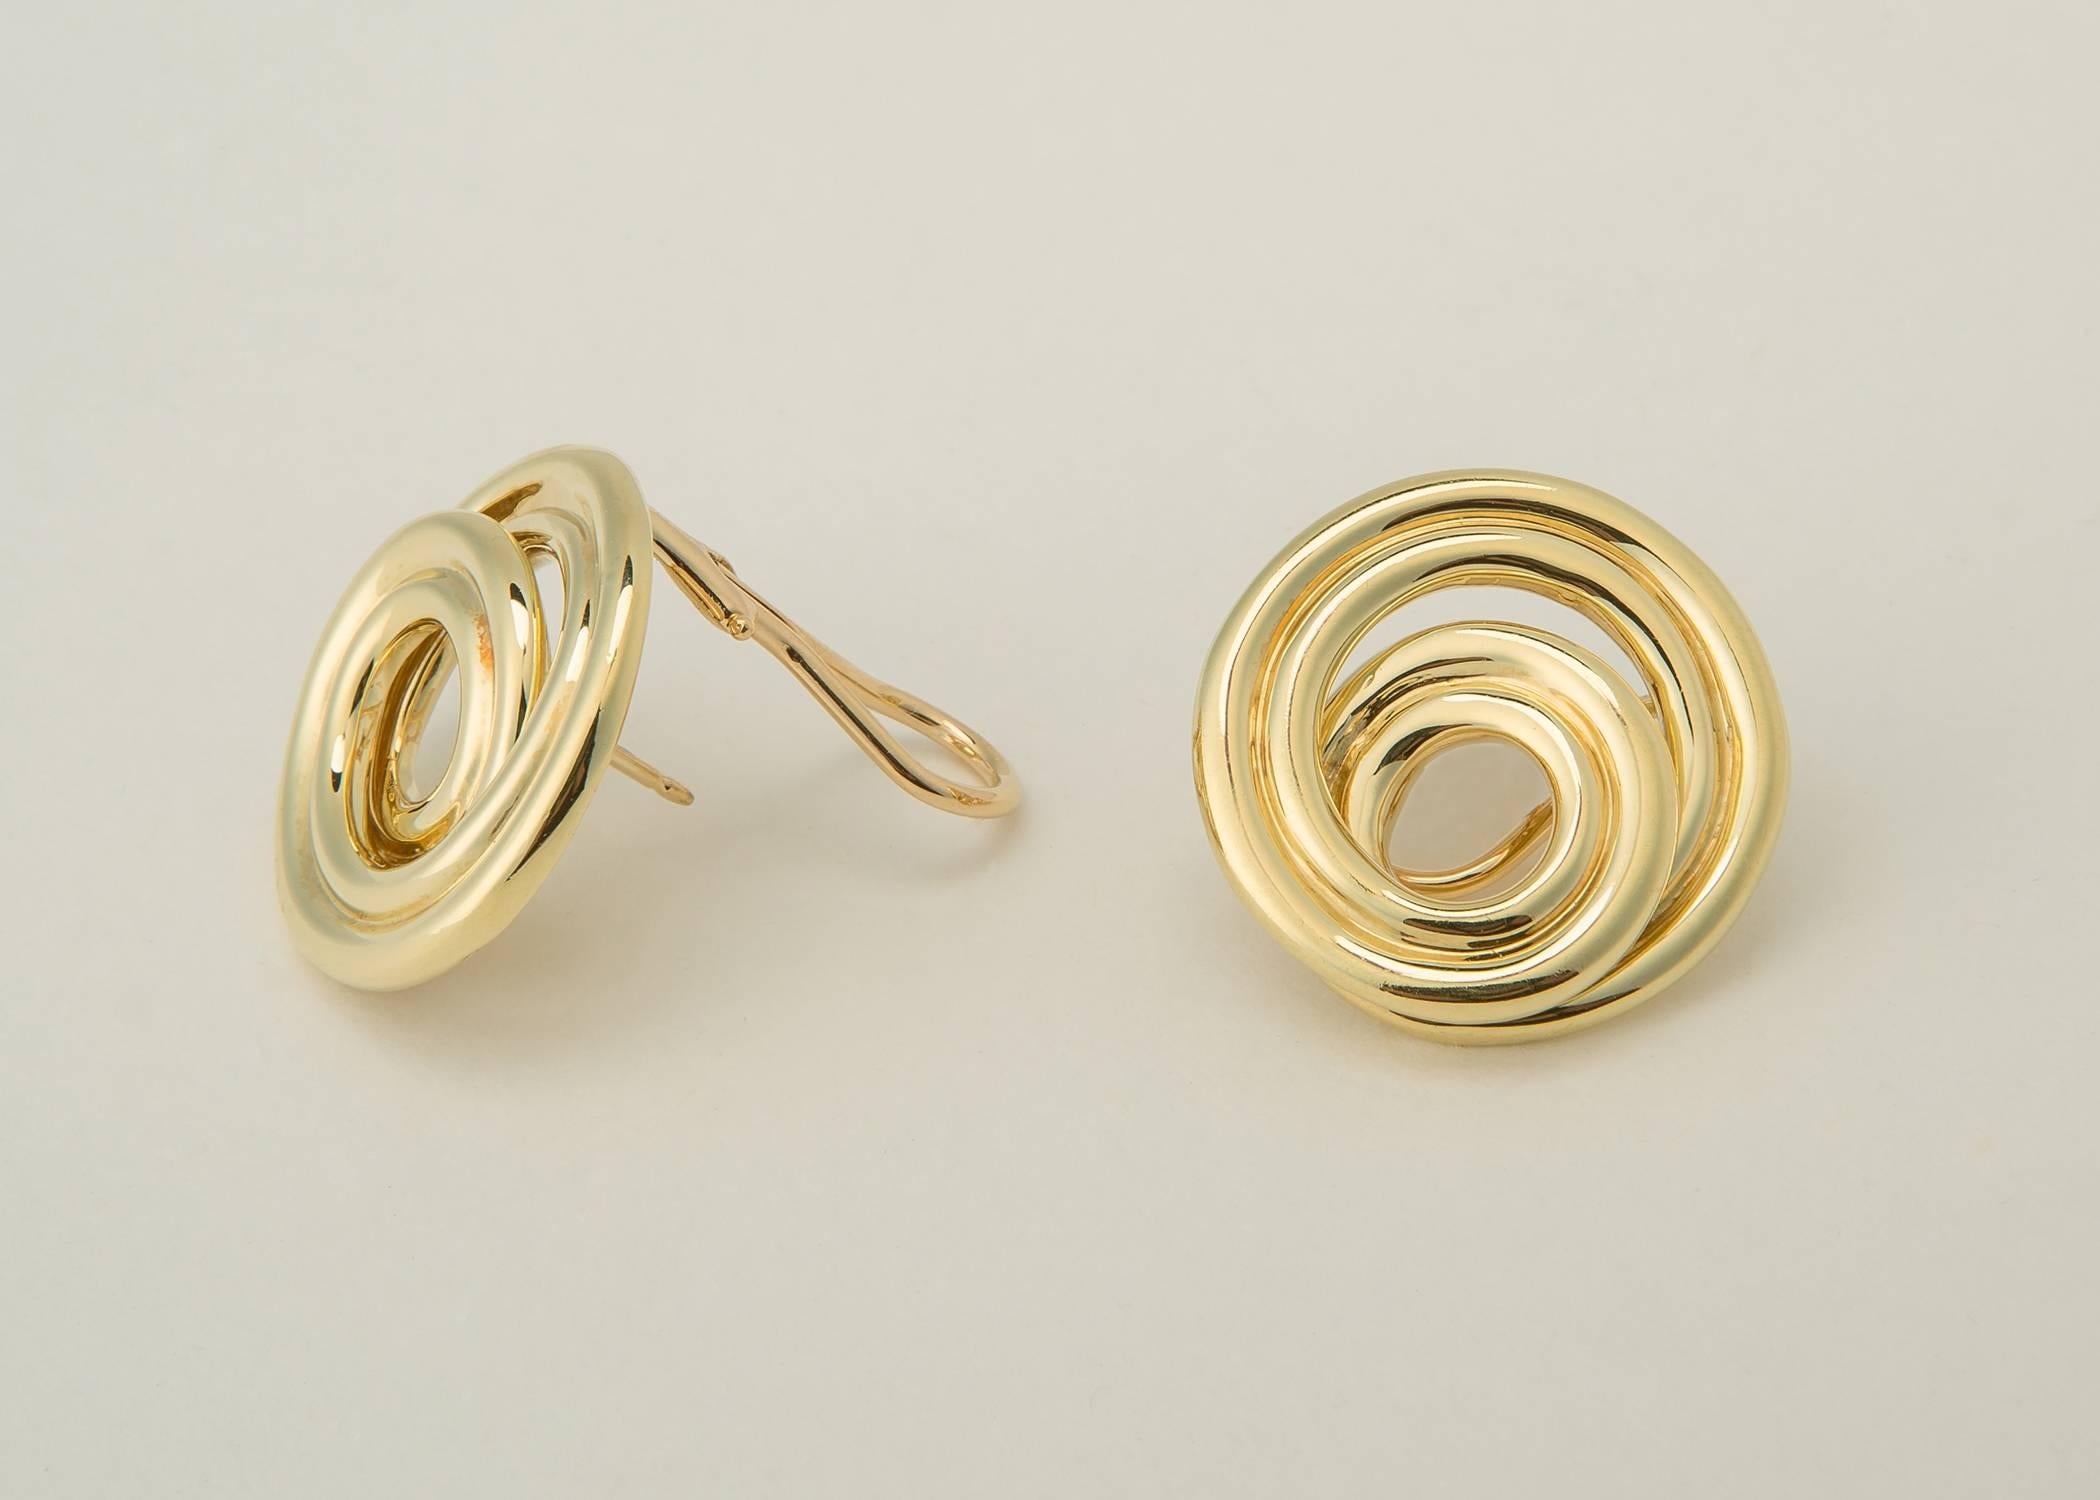 Simple and Chic. Tiffany & Co. creates an easy wearable earring with swirls of 18k gold. Tiffany quality and design all the way.  7/8's of an inch in size